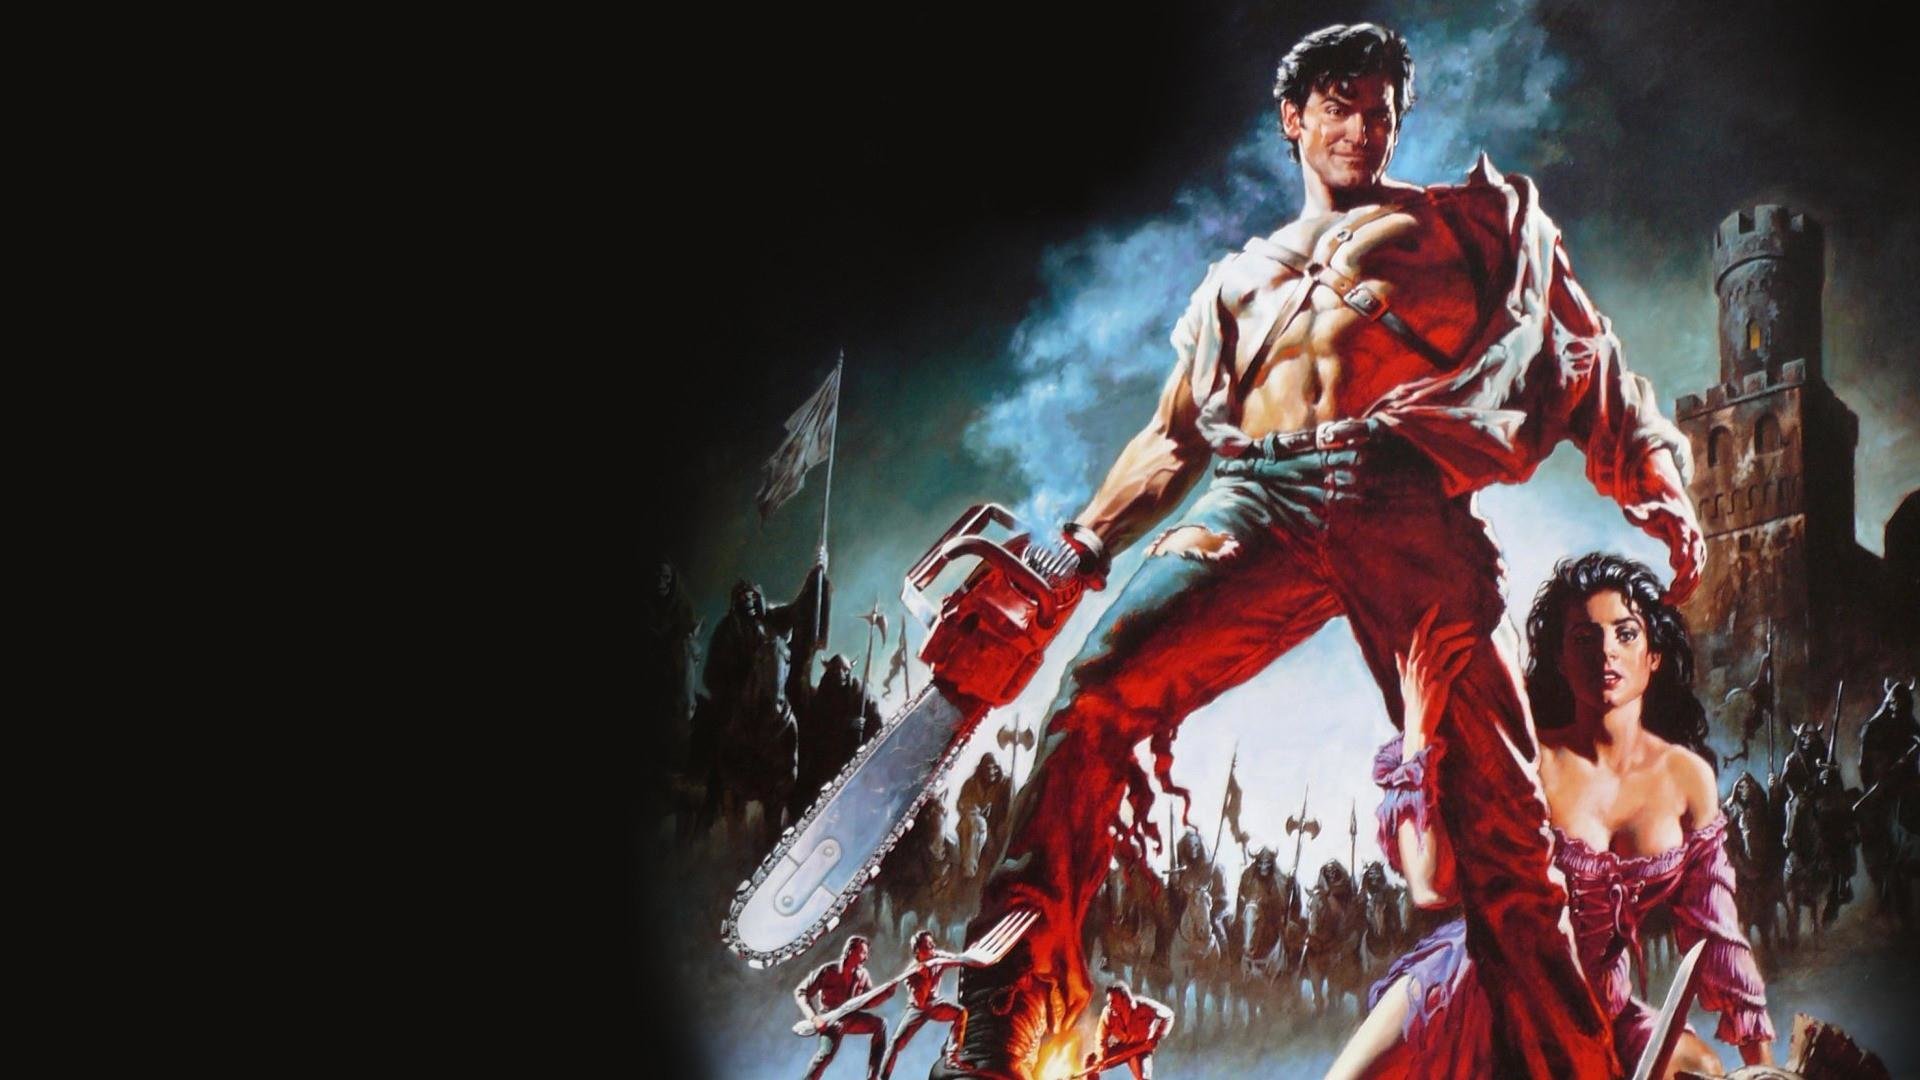 Best Army Of Darkness Movie wallpaper ID:378521 for High Resolution hd 1920x1080 desktop